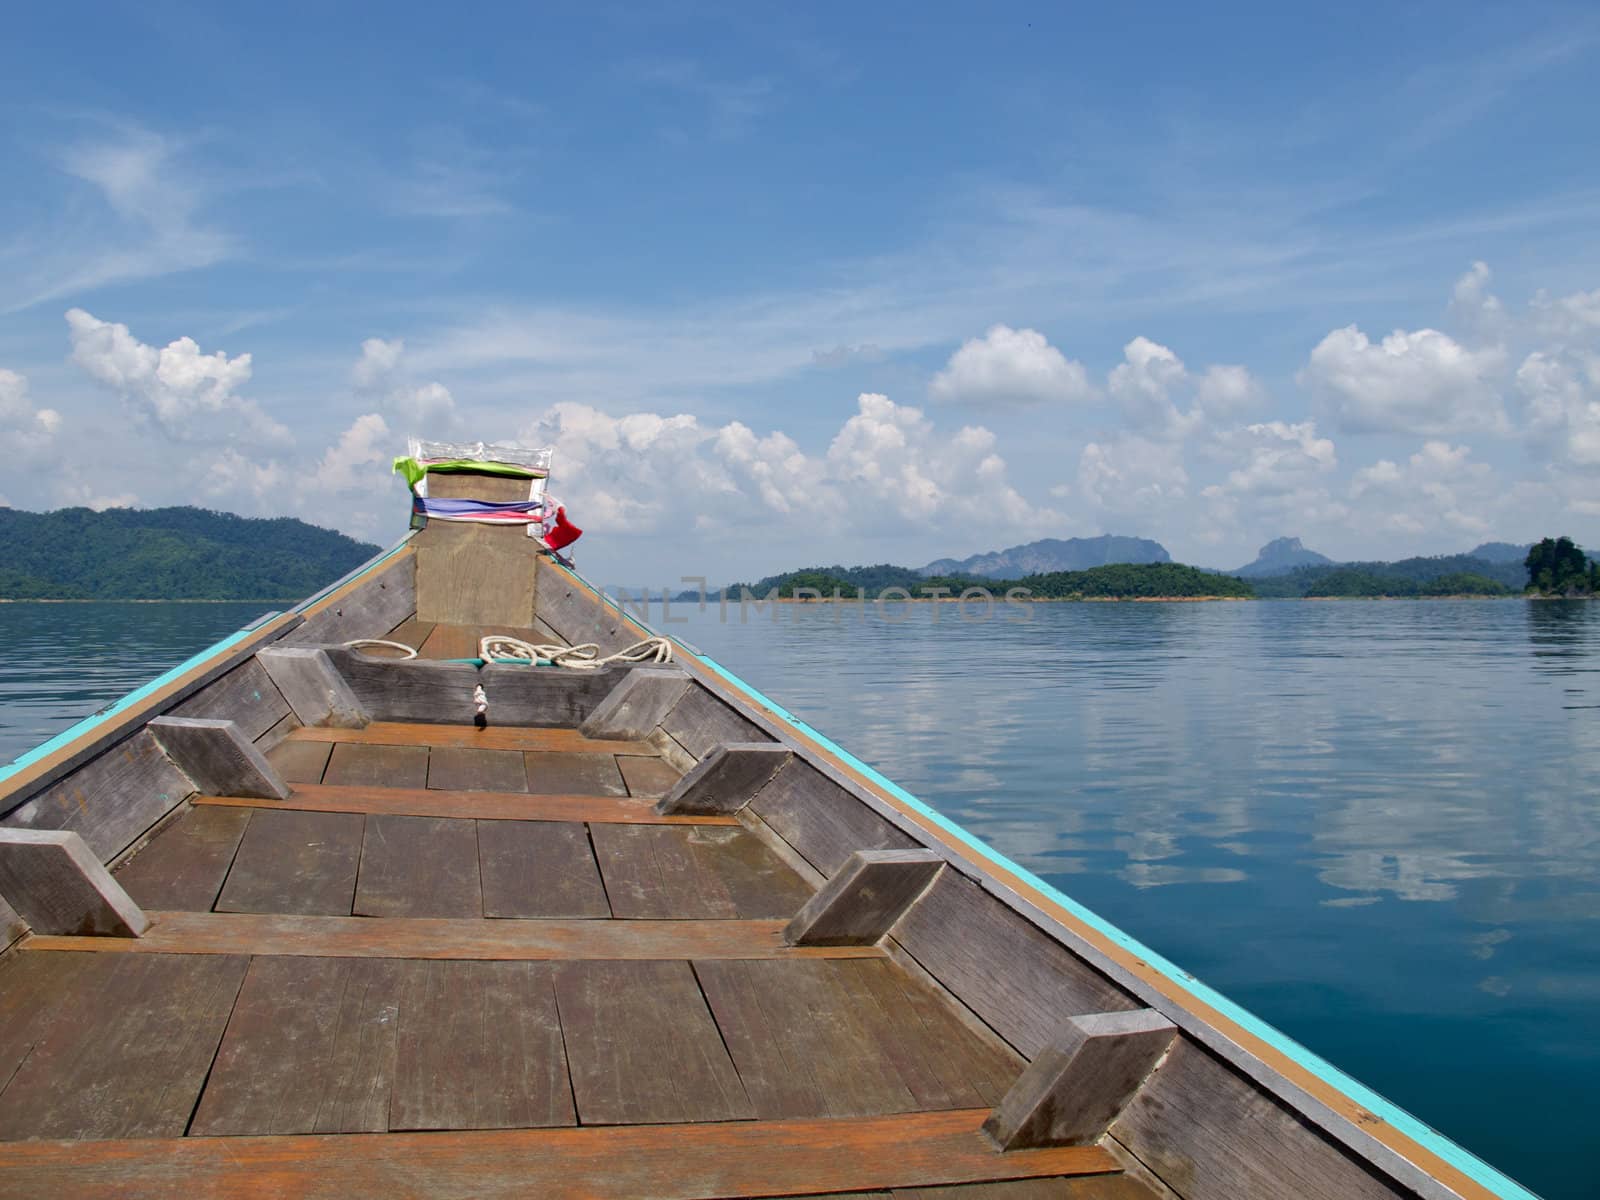 Cloud, Sky, Mountain , Boat and Ratchapapa Dam, Thailand by dul_ny